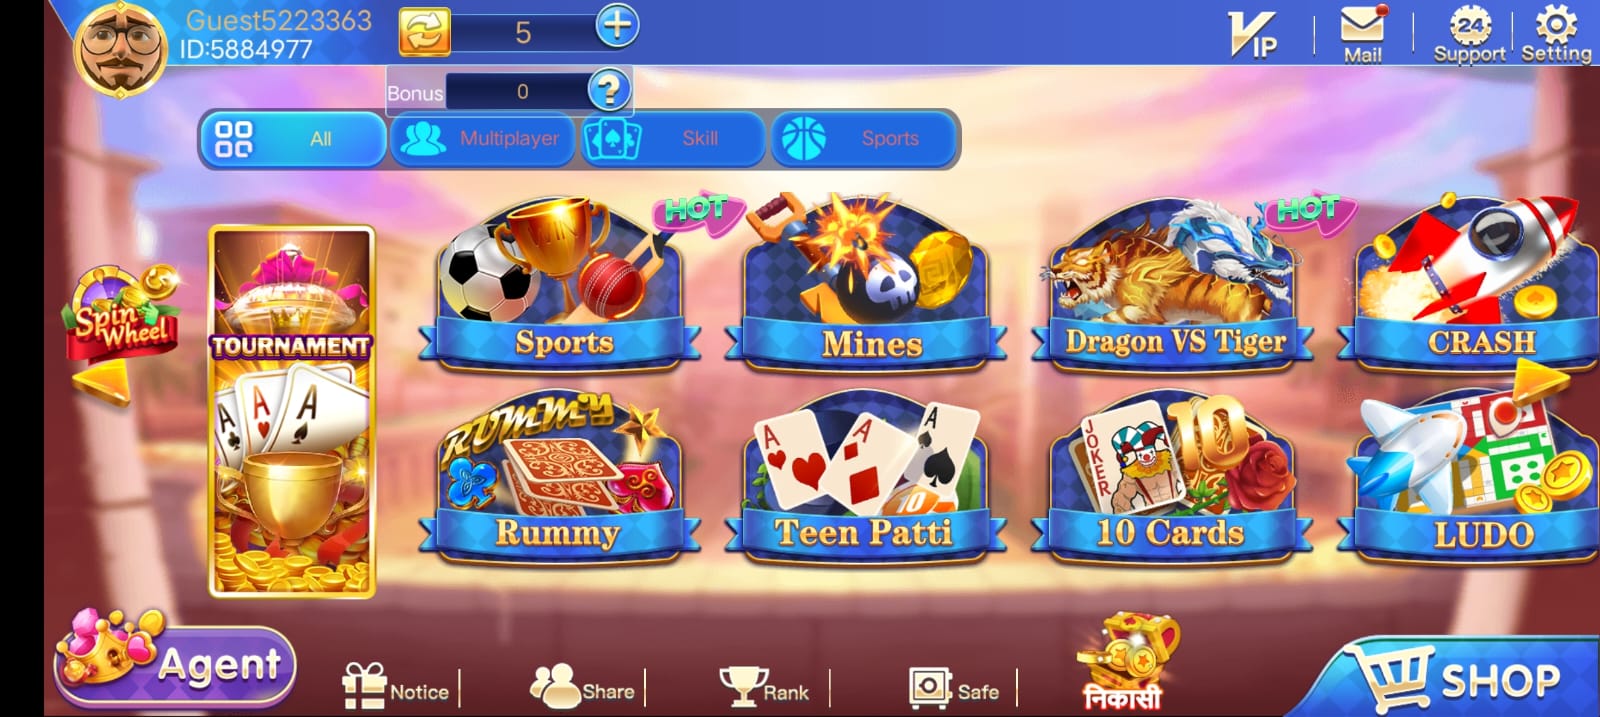 Available Game’s In Rummy Flash Application